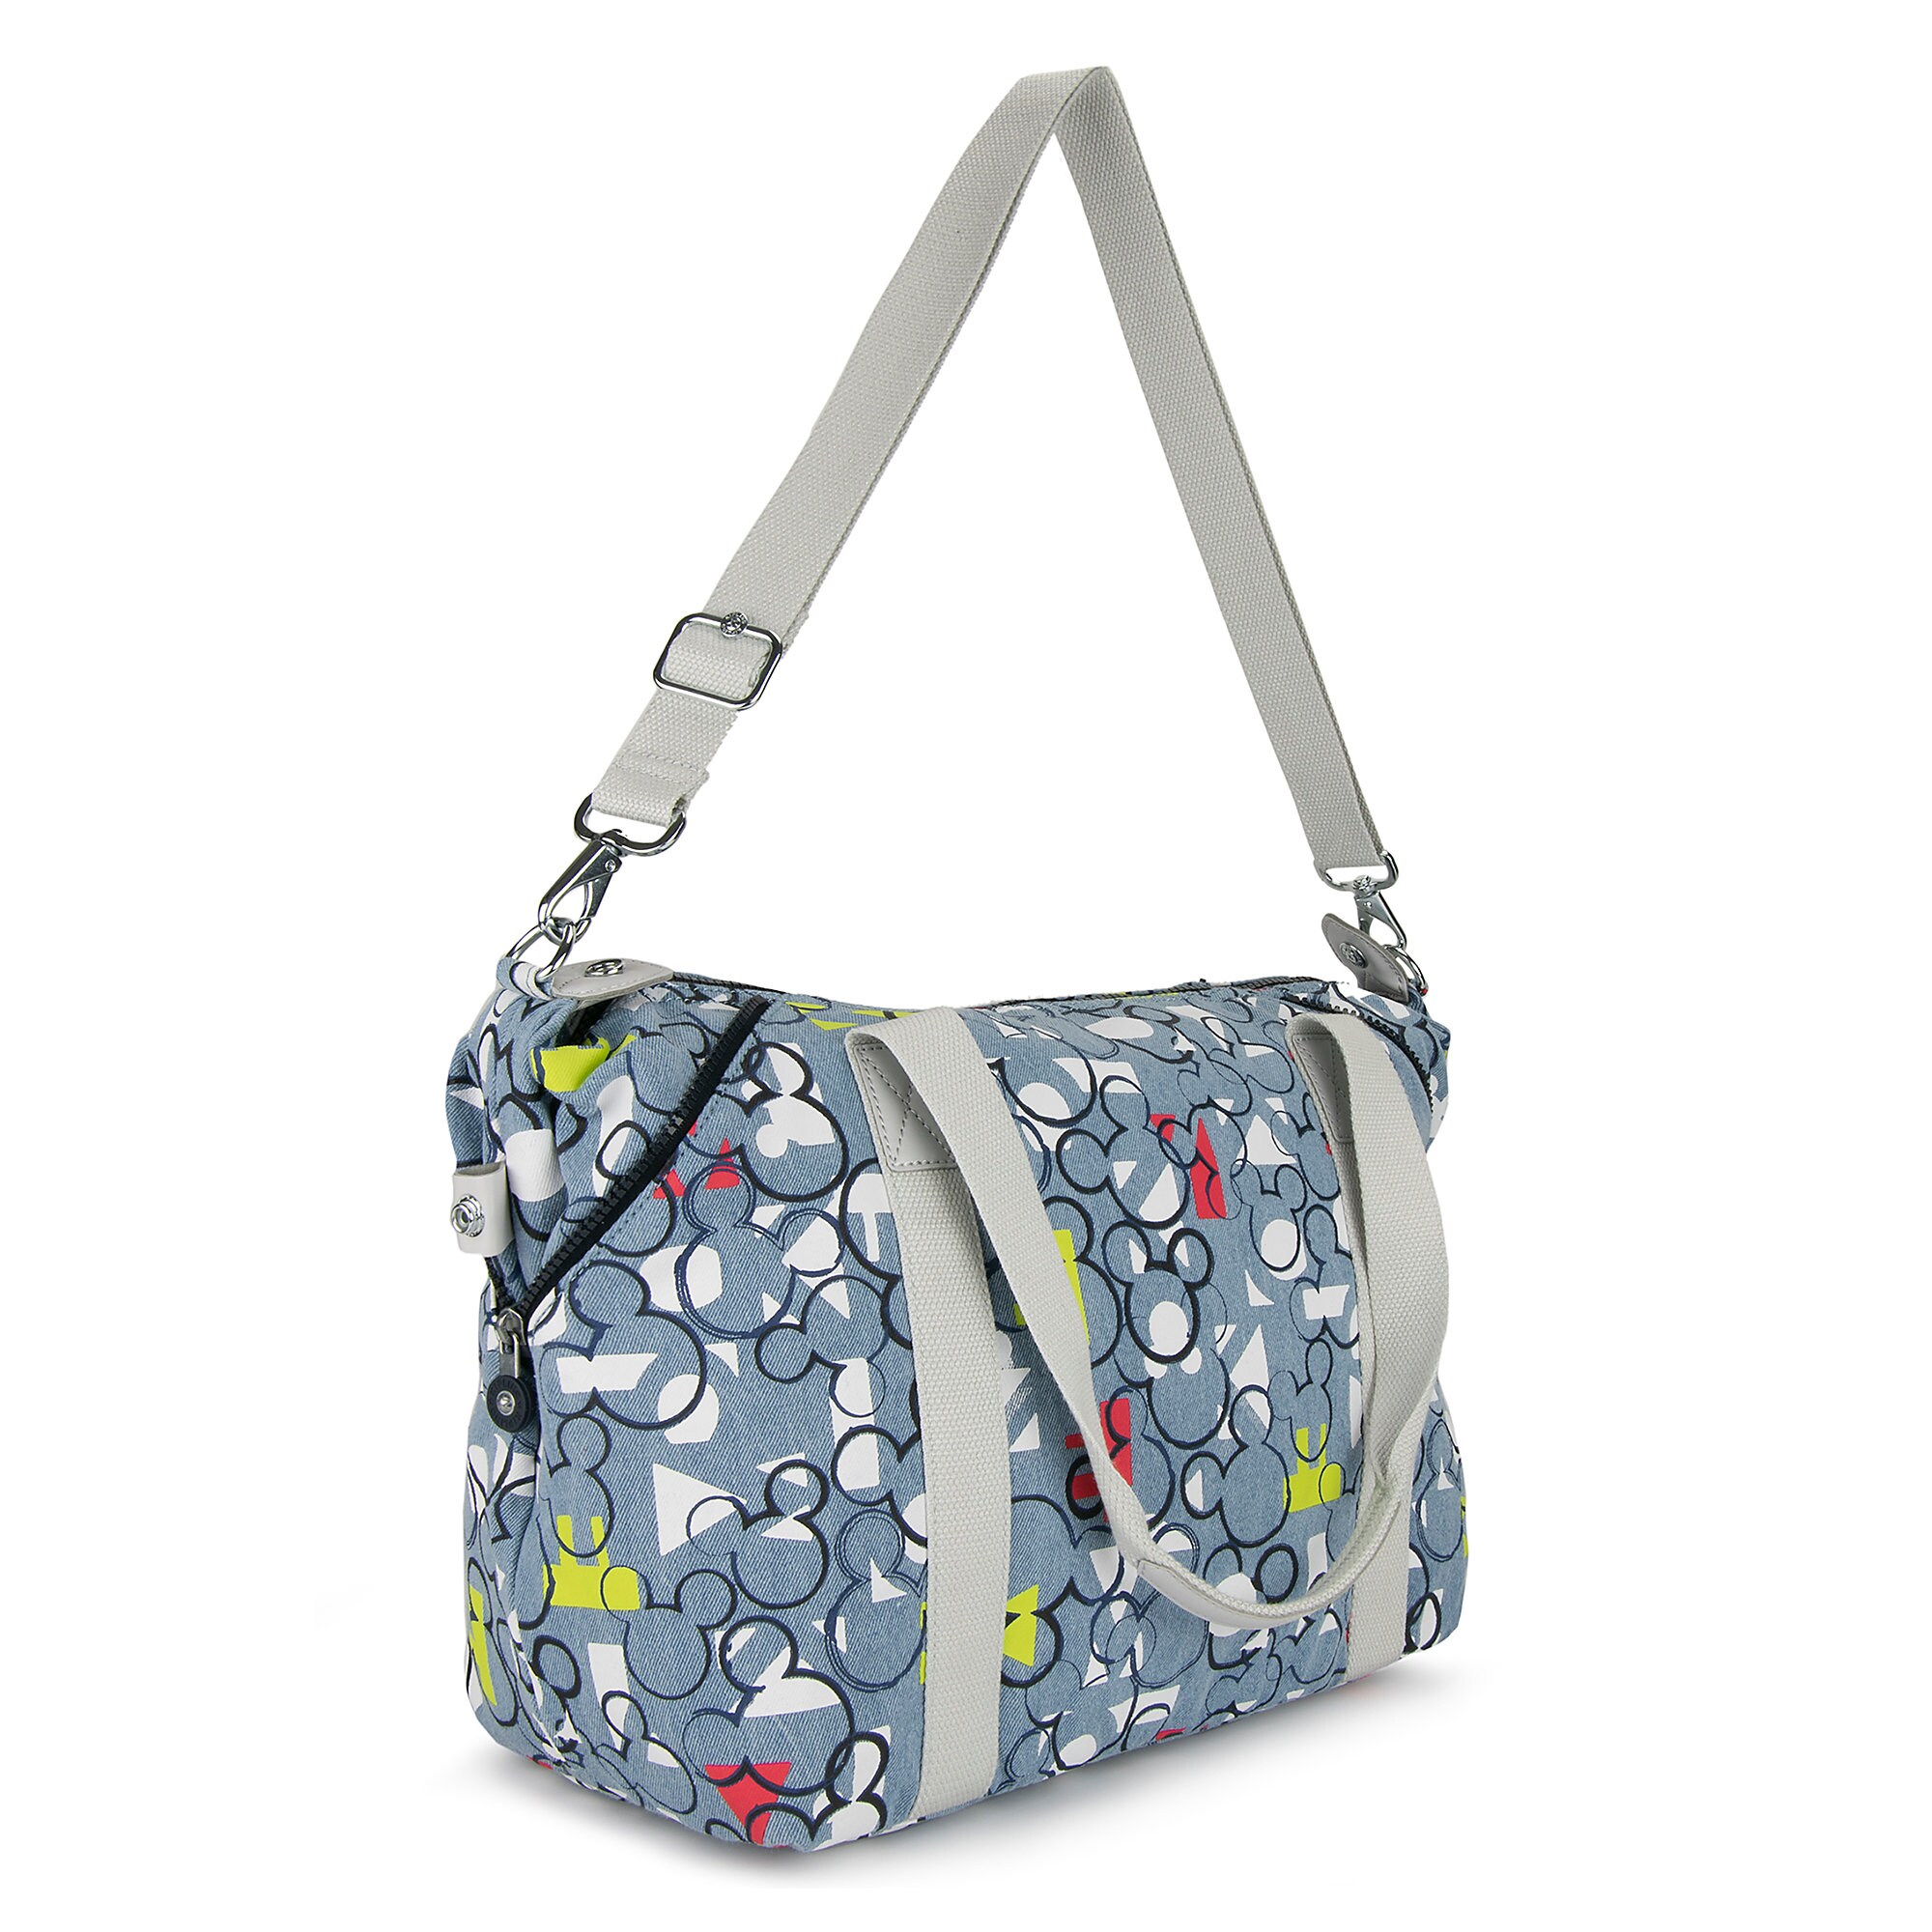 Mickey Mouse Duffle Bag by Kipling